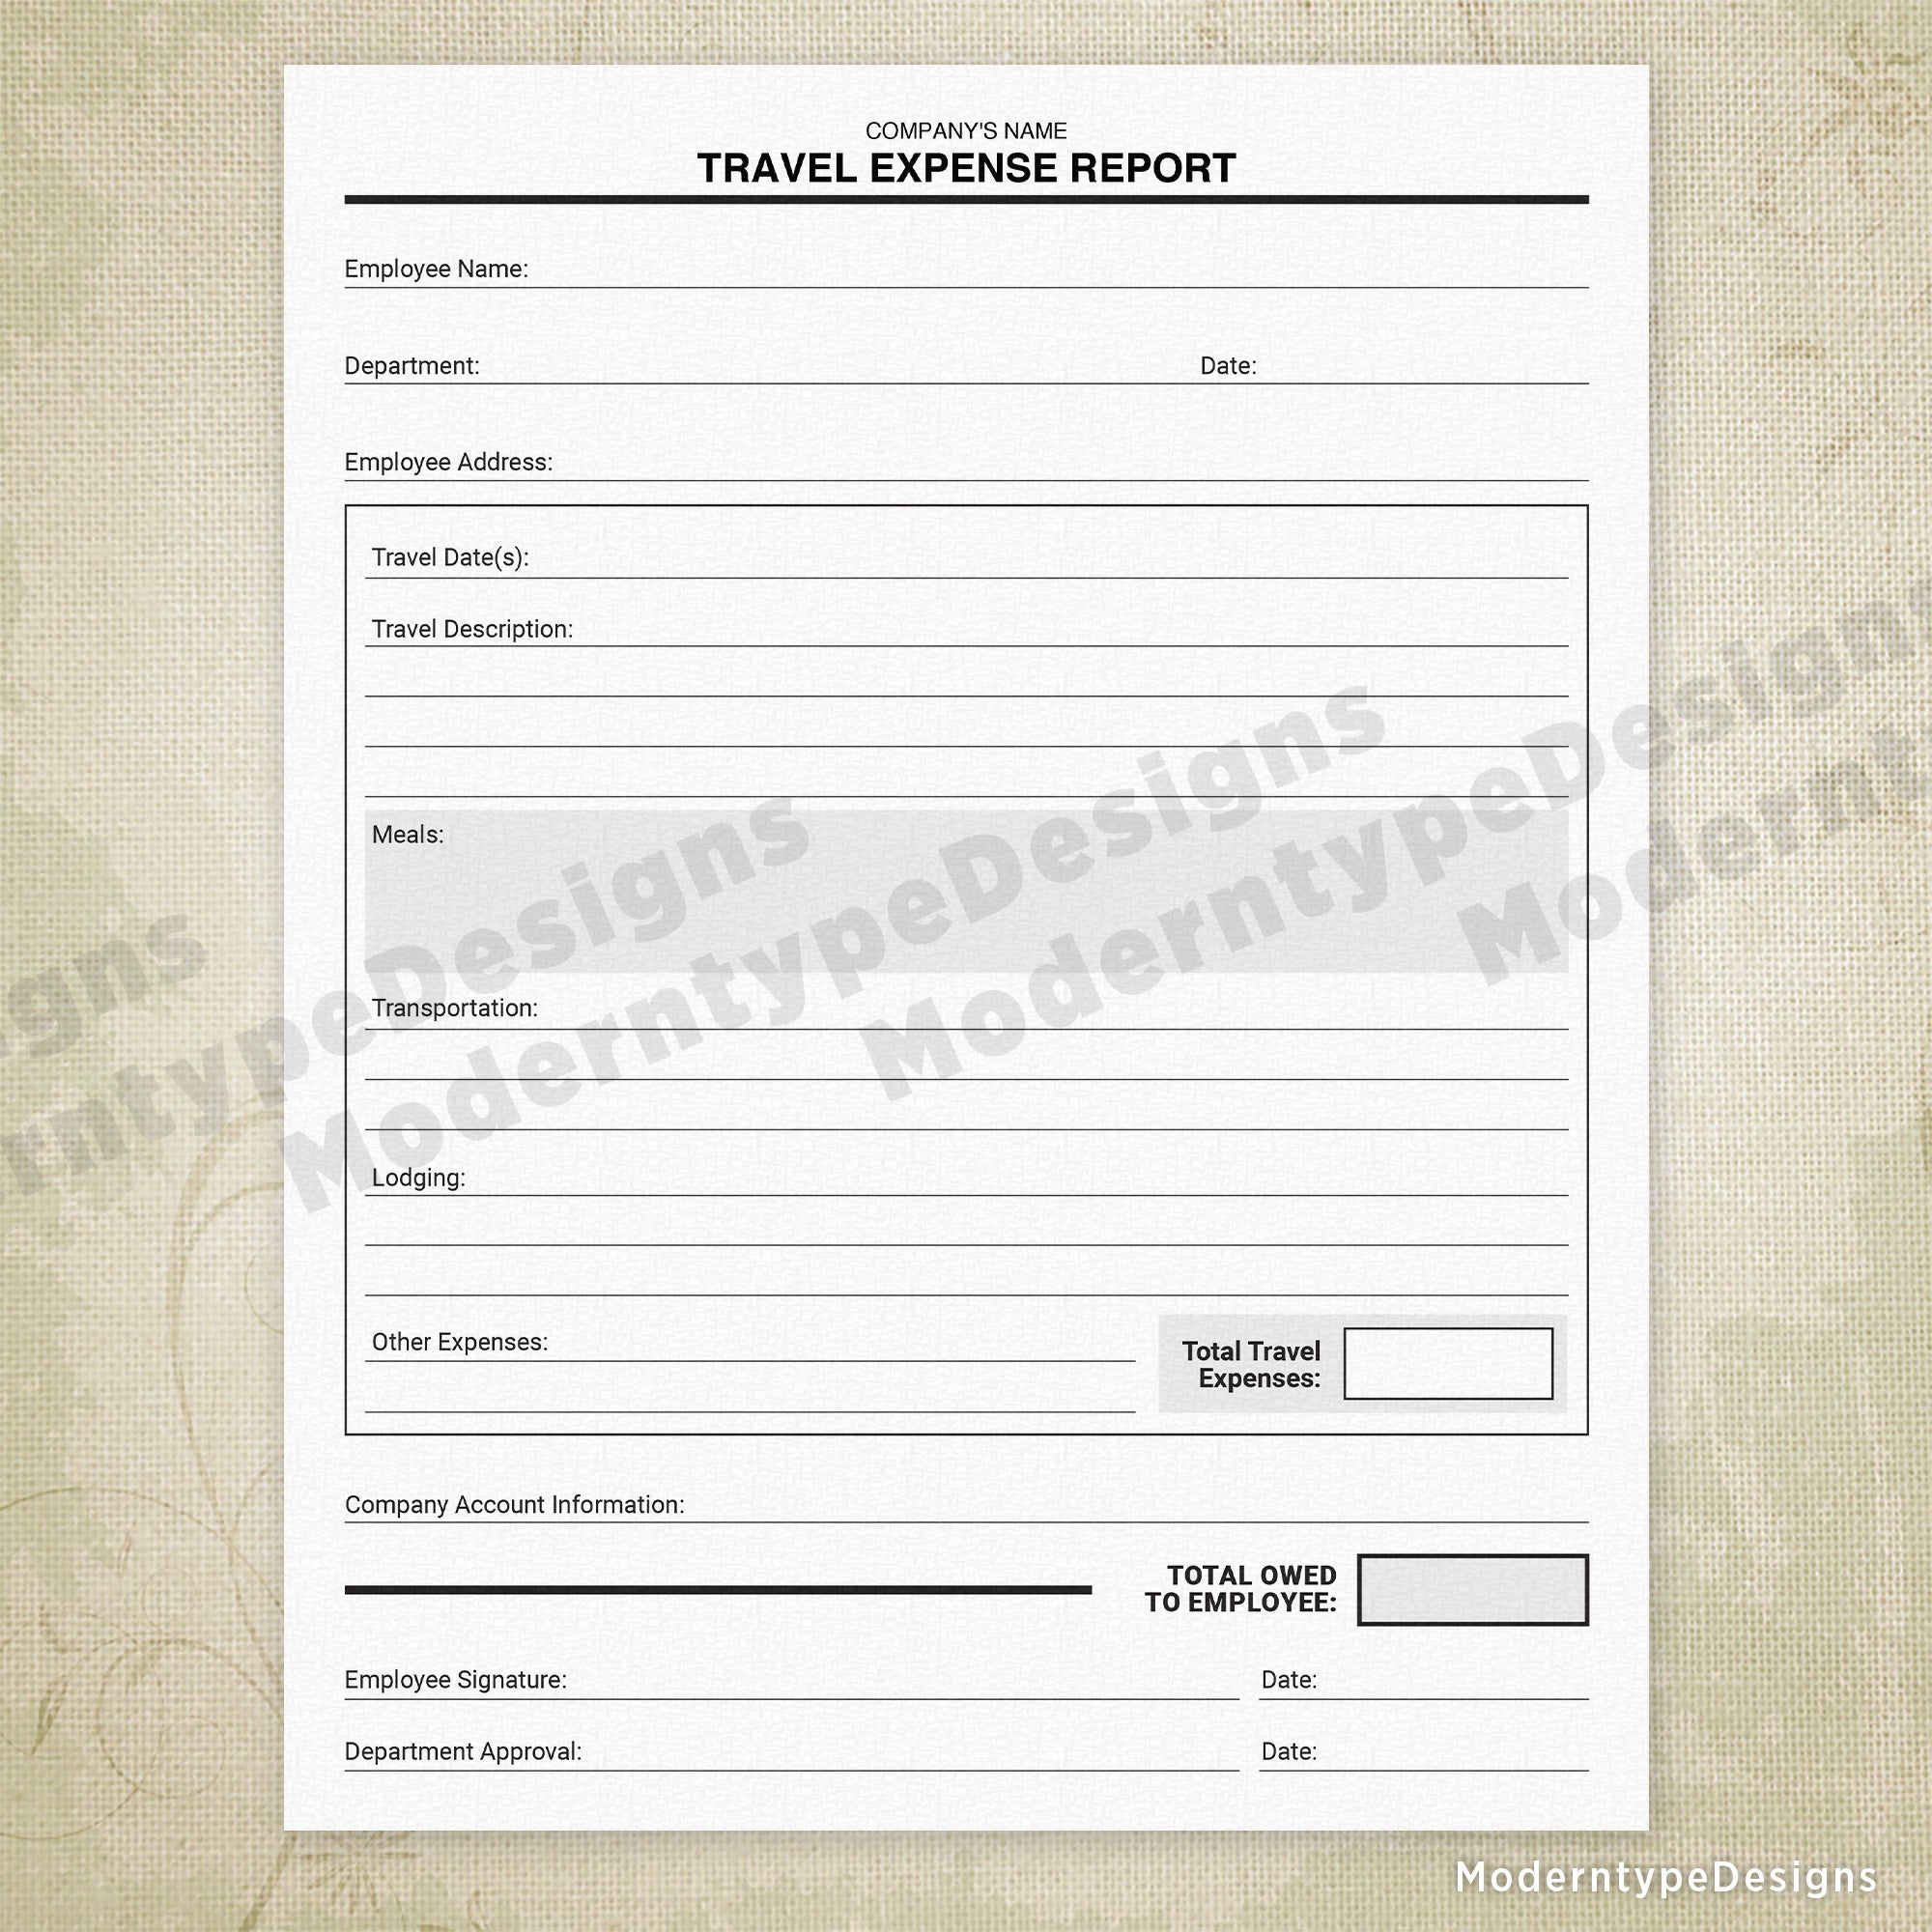 Travel Expense Report Printable Form, Personalized